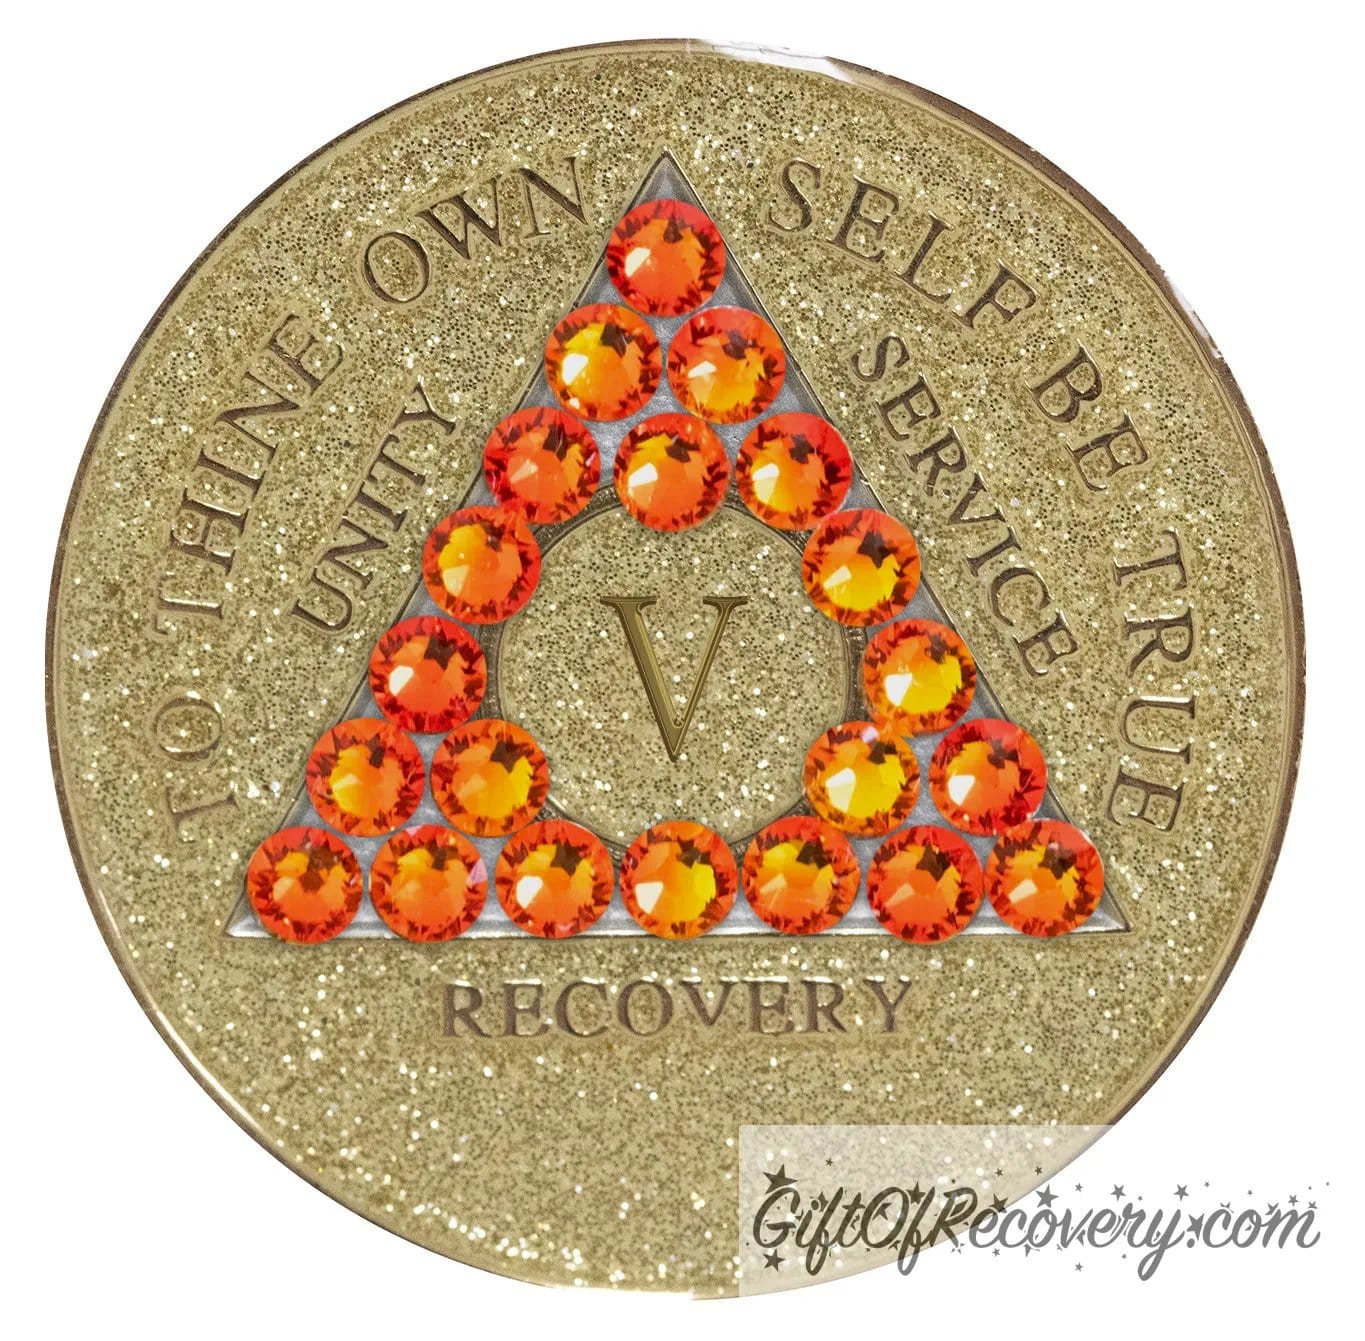 5 year Gold glitter AA medallion with twenty-one fire opal genuine crystals in the shape of a triangle, to thine own self be true, unity, service, recovery embossed in 14k gold-plated brass along with the rim of the medallion, sealed in a high-quality, chip and scratch-resistant resin dome giving it a beautiful glossy look that will last.